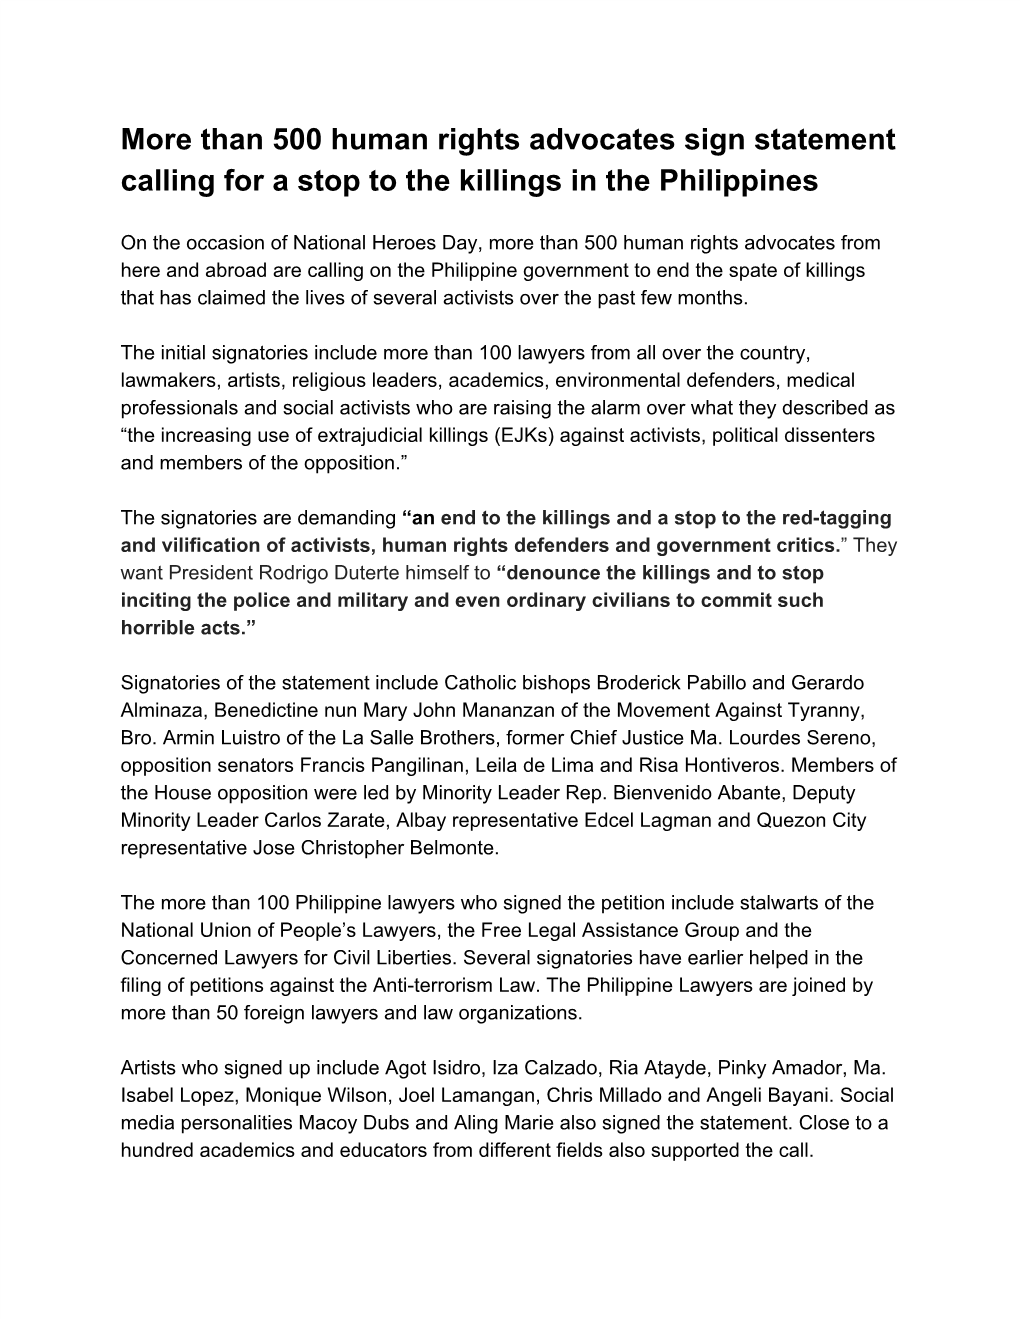 More Than 500 Human Rights Advocates Sign Statement Calling for a Stop to the Killings in the Philippines